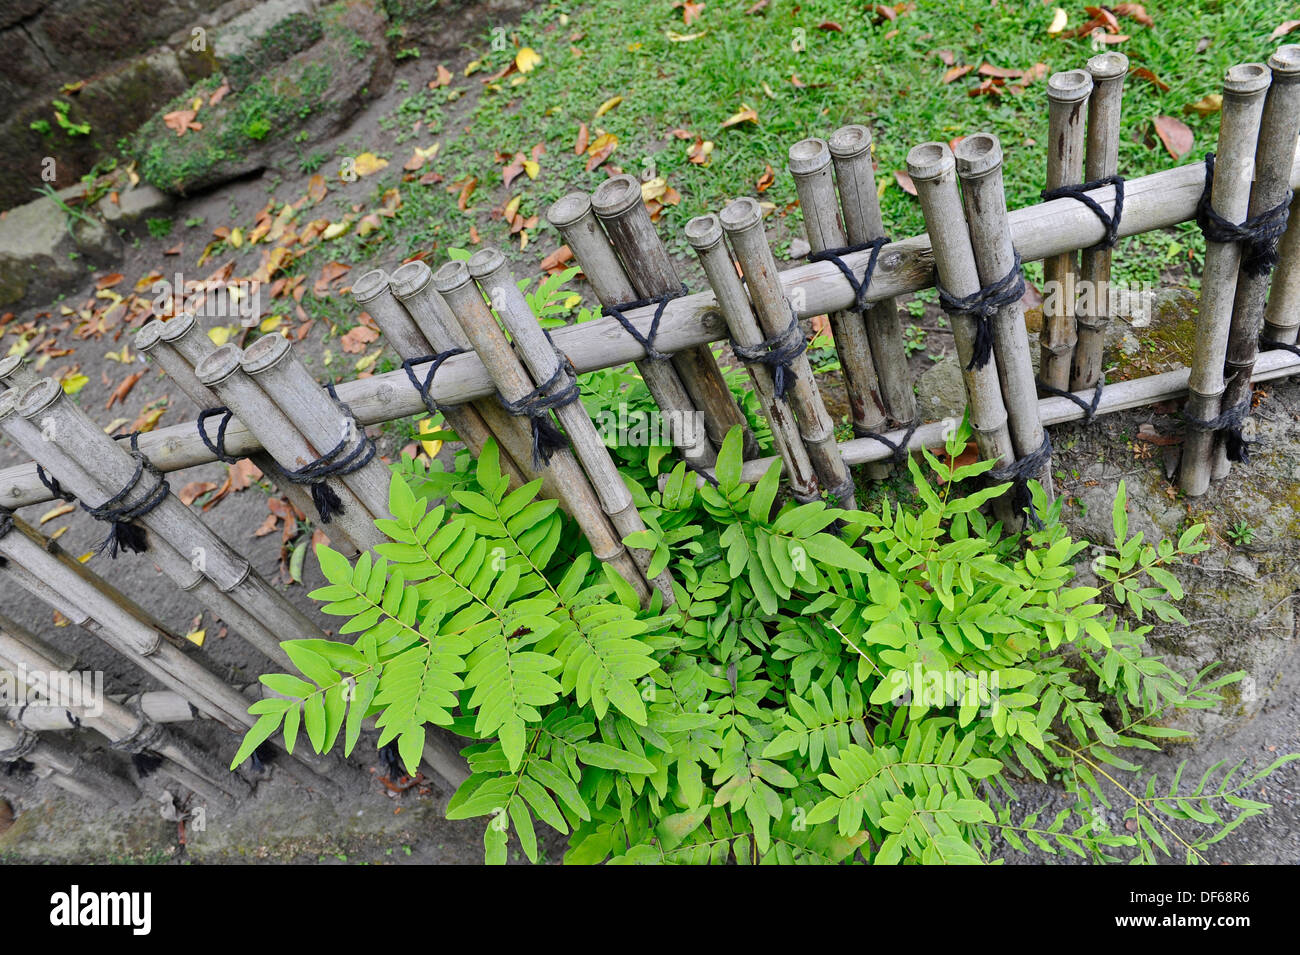 Cut bamboo used as a building material to from a small garden fence. Stock Photo